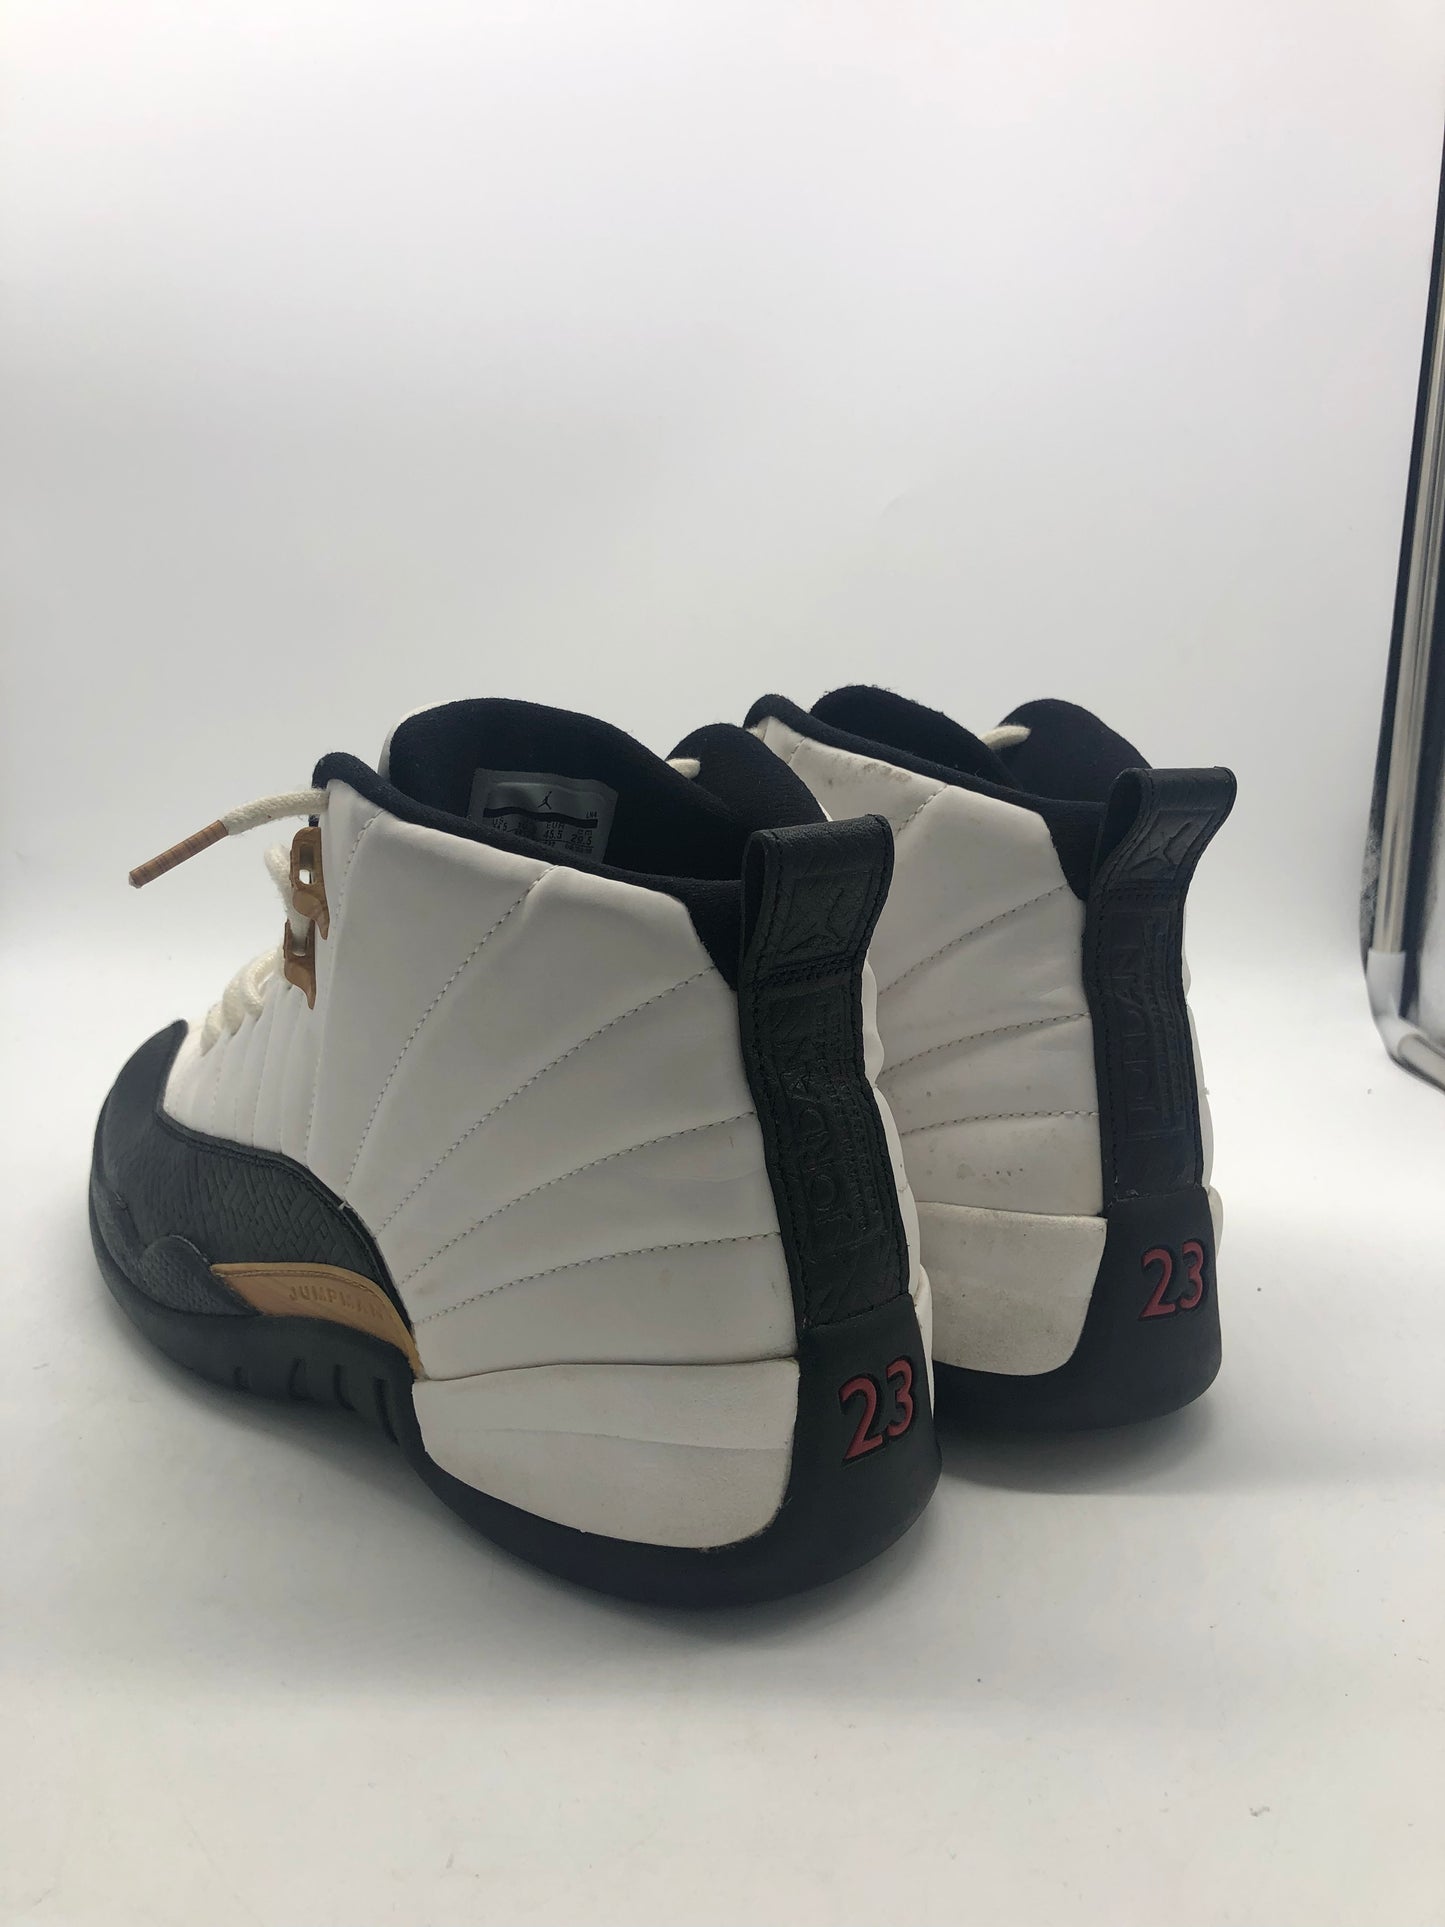 Load image into Gallery viewer, Air Jordan 12 Chinese New Years Sz 11.5
